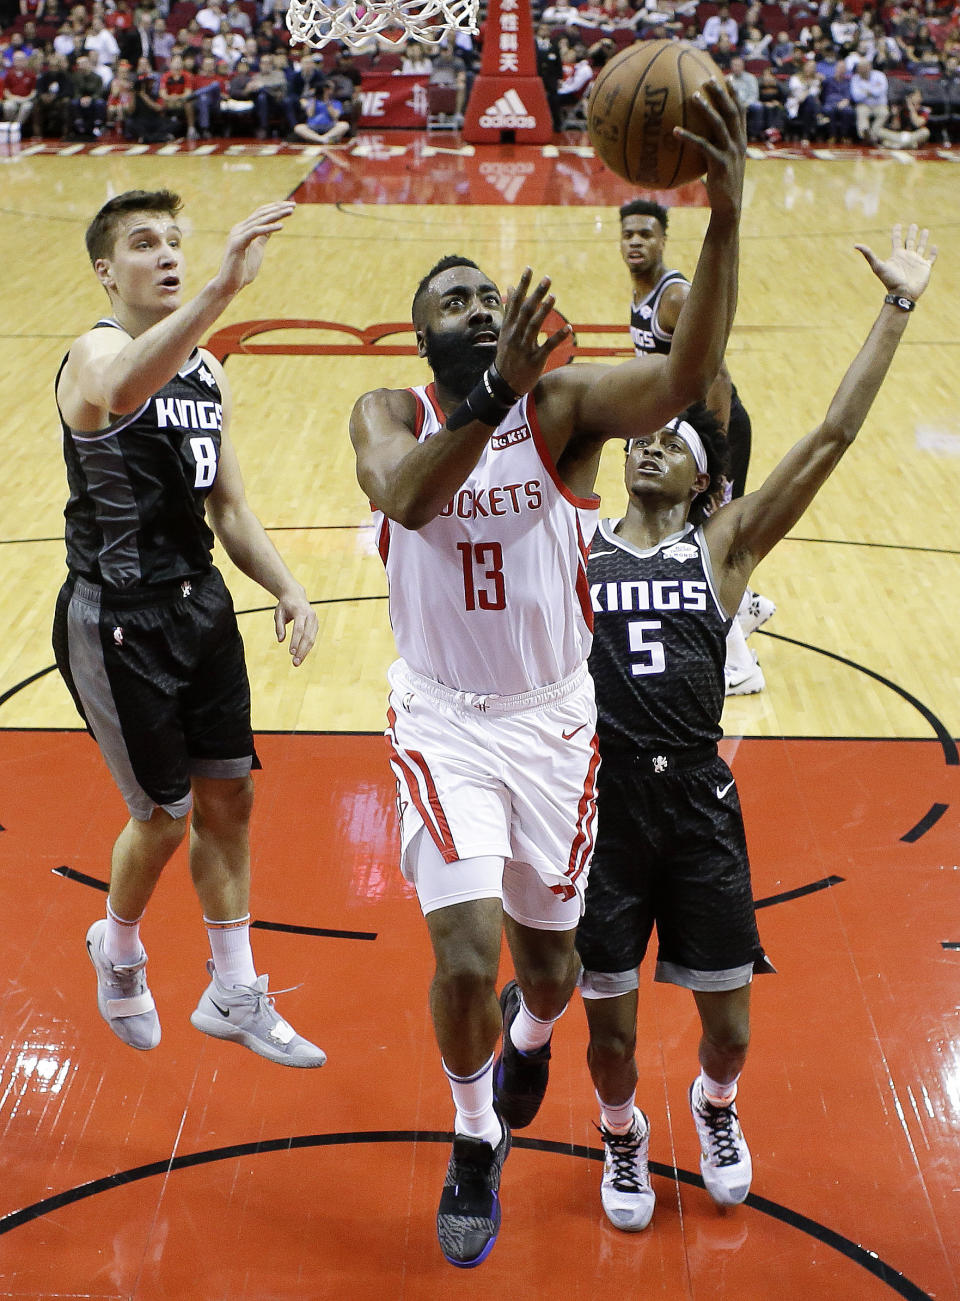 Houston Rockets guard James Harden (13) drives to the basket as Sacramento Kings guard Bogdan Bogdanovic (8) and guard De'Aaron Fox defend during the first half of an NBA basketball game, Saturday, March 30, 2019, in Houston. (AP Photo/Eric Christian Smith)